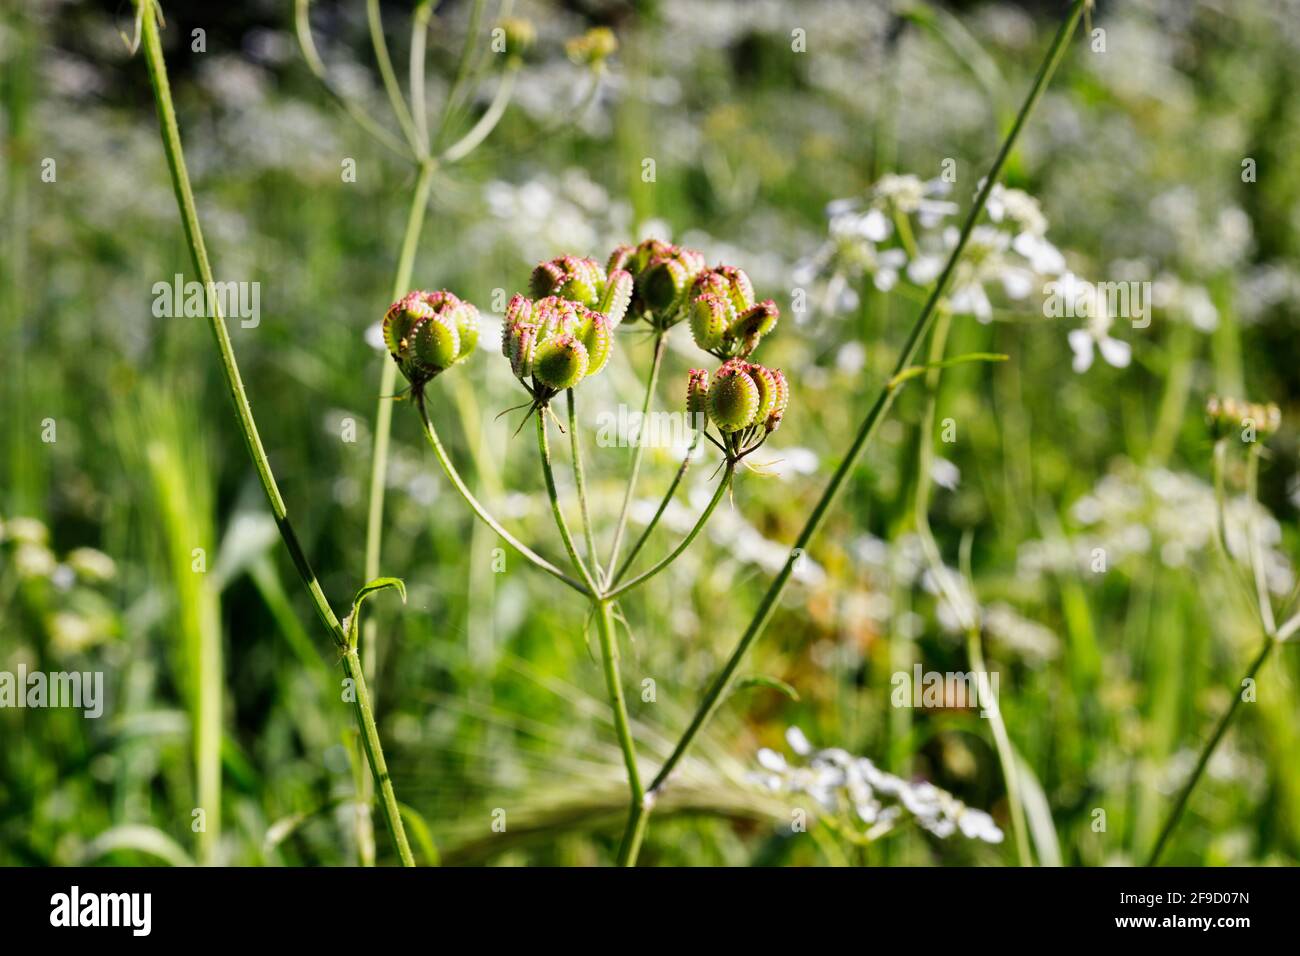 Seeds of tordylium apulum -Roman pimpernel  or Mediterranean hartwort -  , green oval shaped fruits ,in the foreground tordylium  white flowers Stock Photo